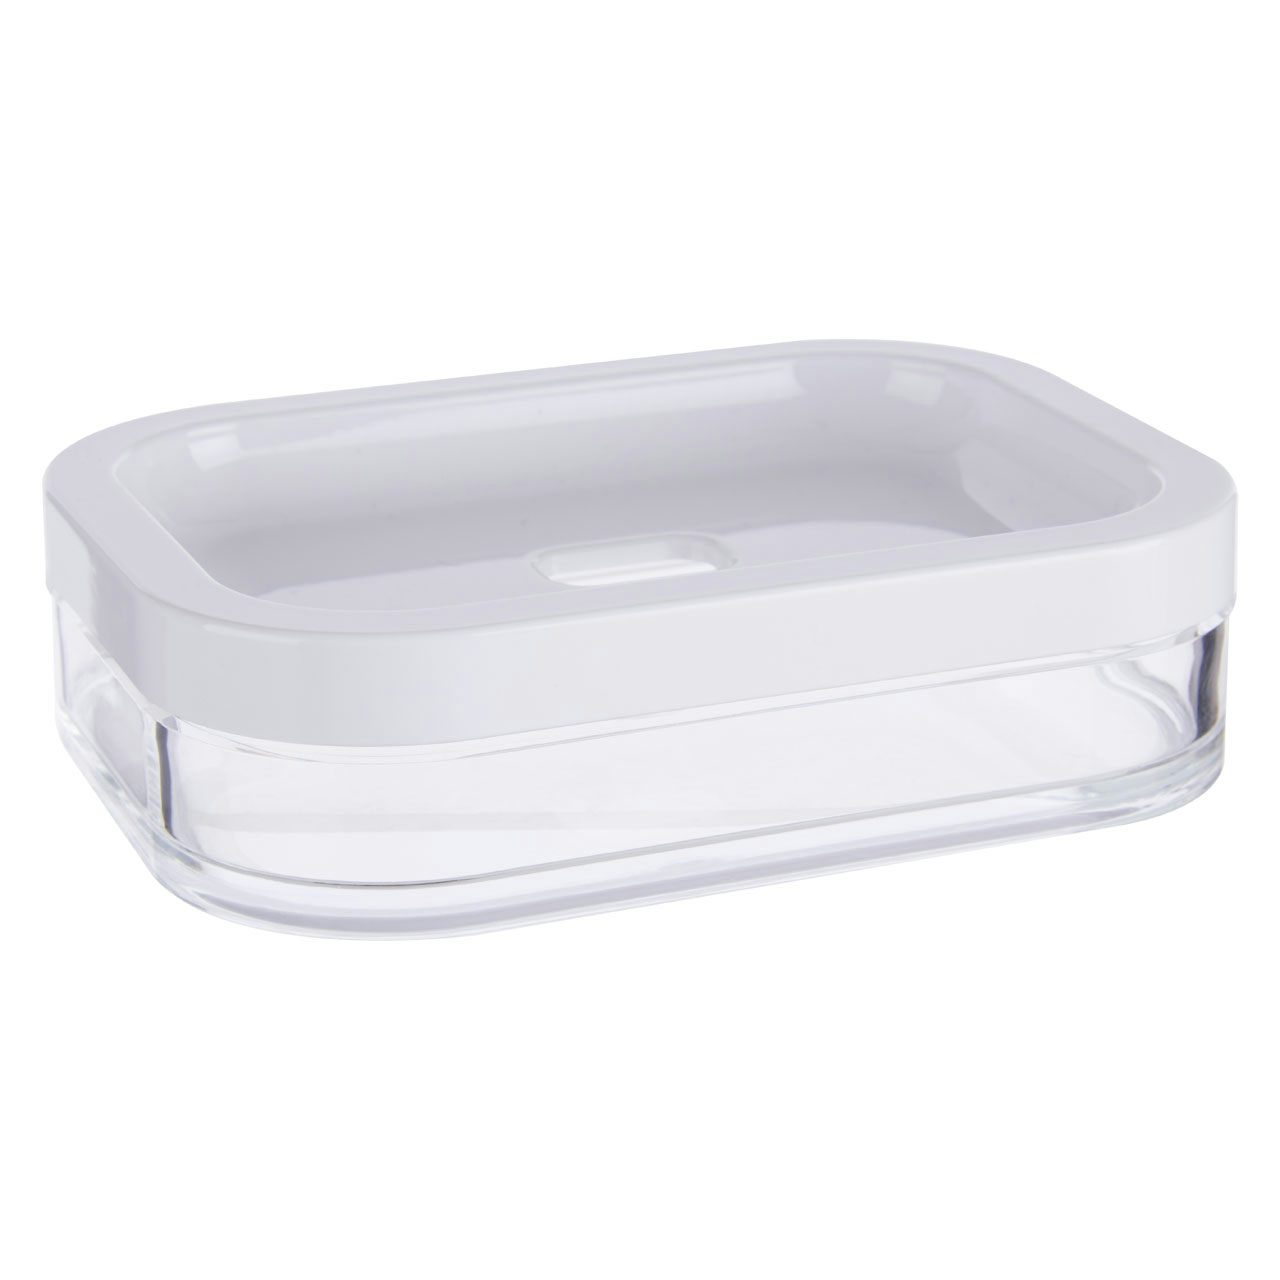 Accents White acrylic soap dish